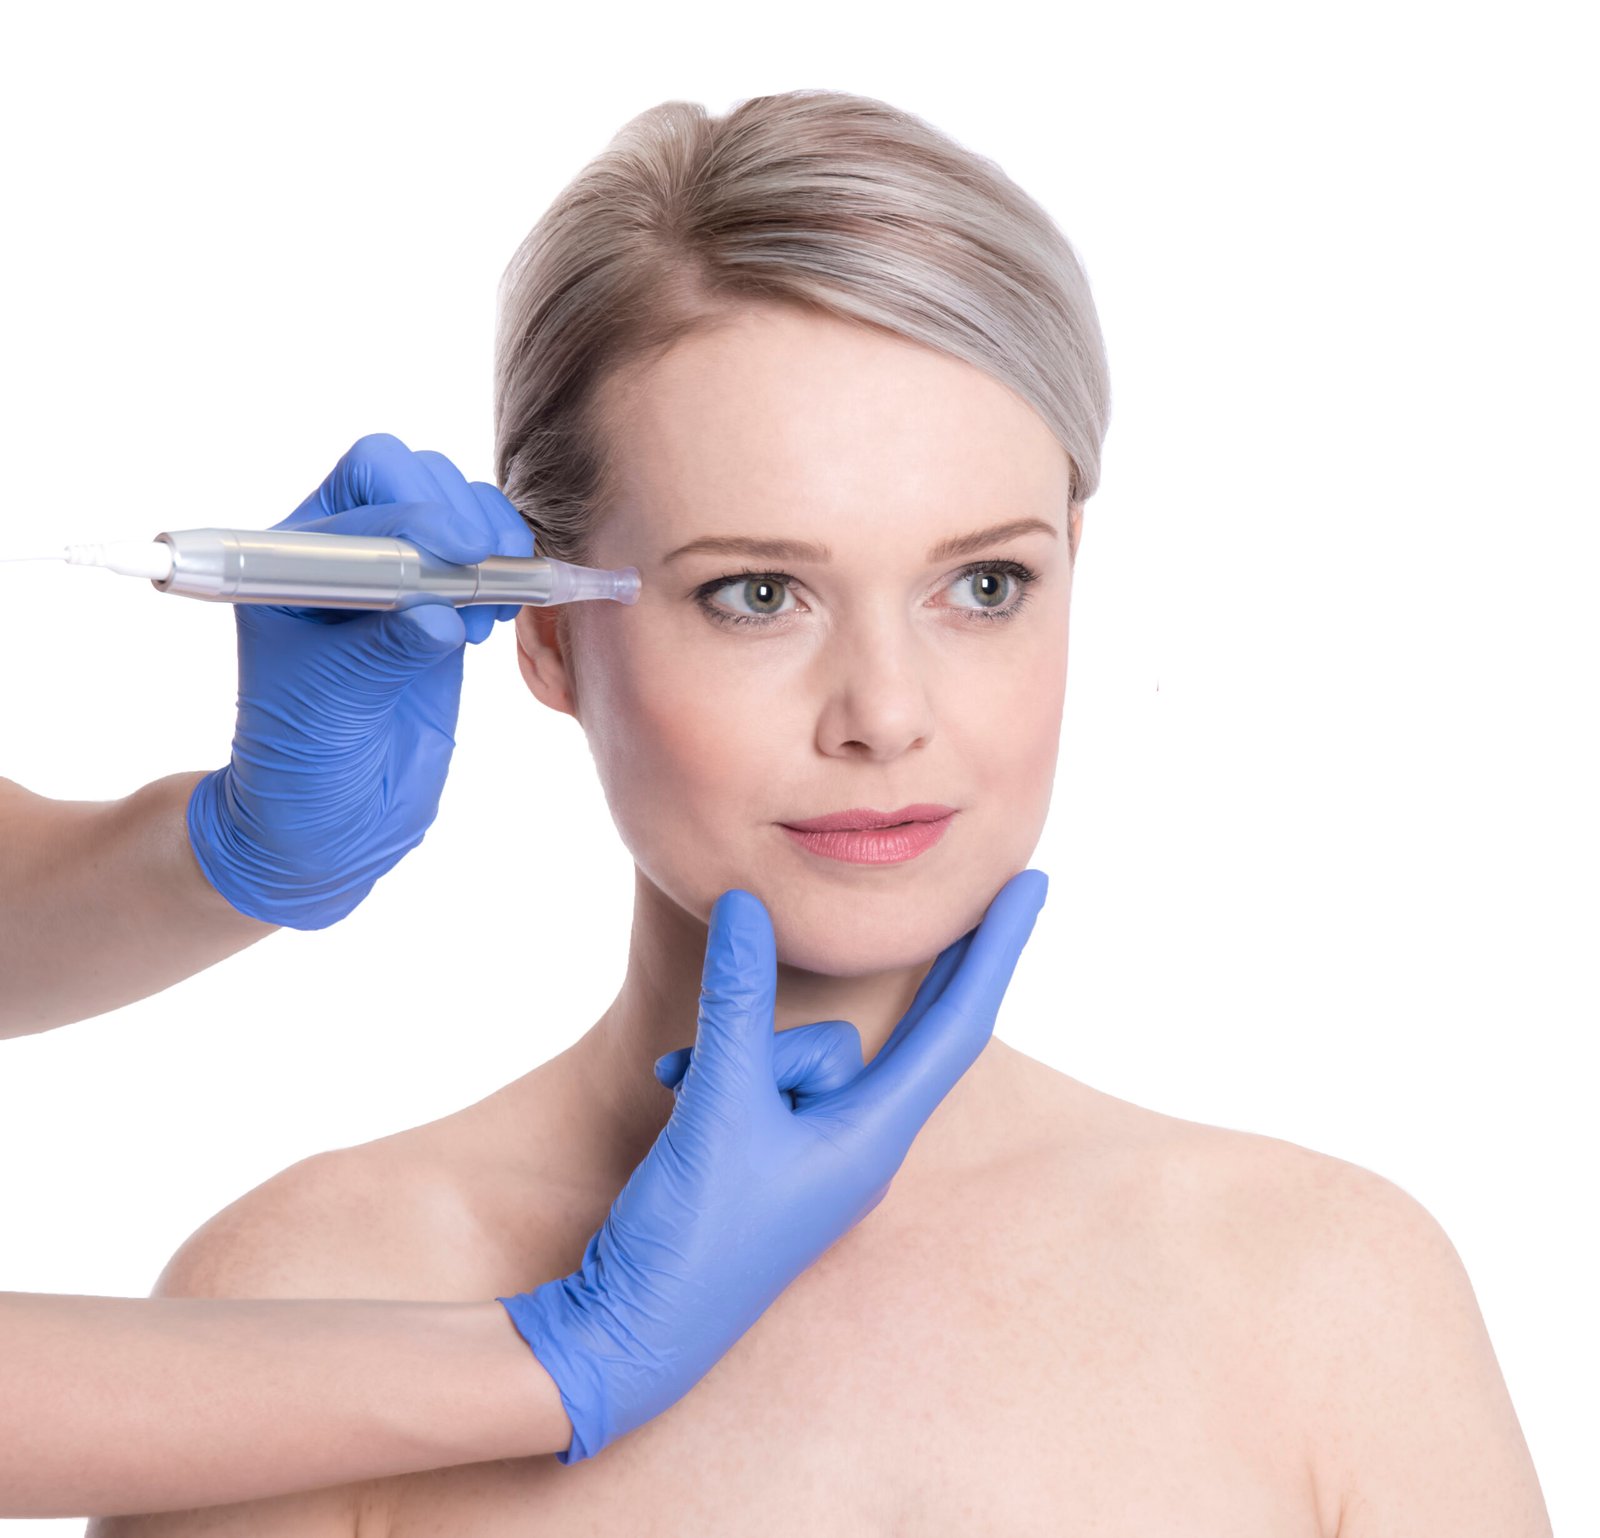 Dermatude Meta Therapy treatment including nitrile blue gloves and a woman with grey hair